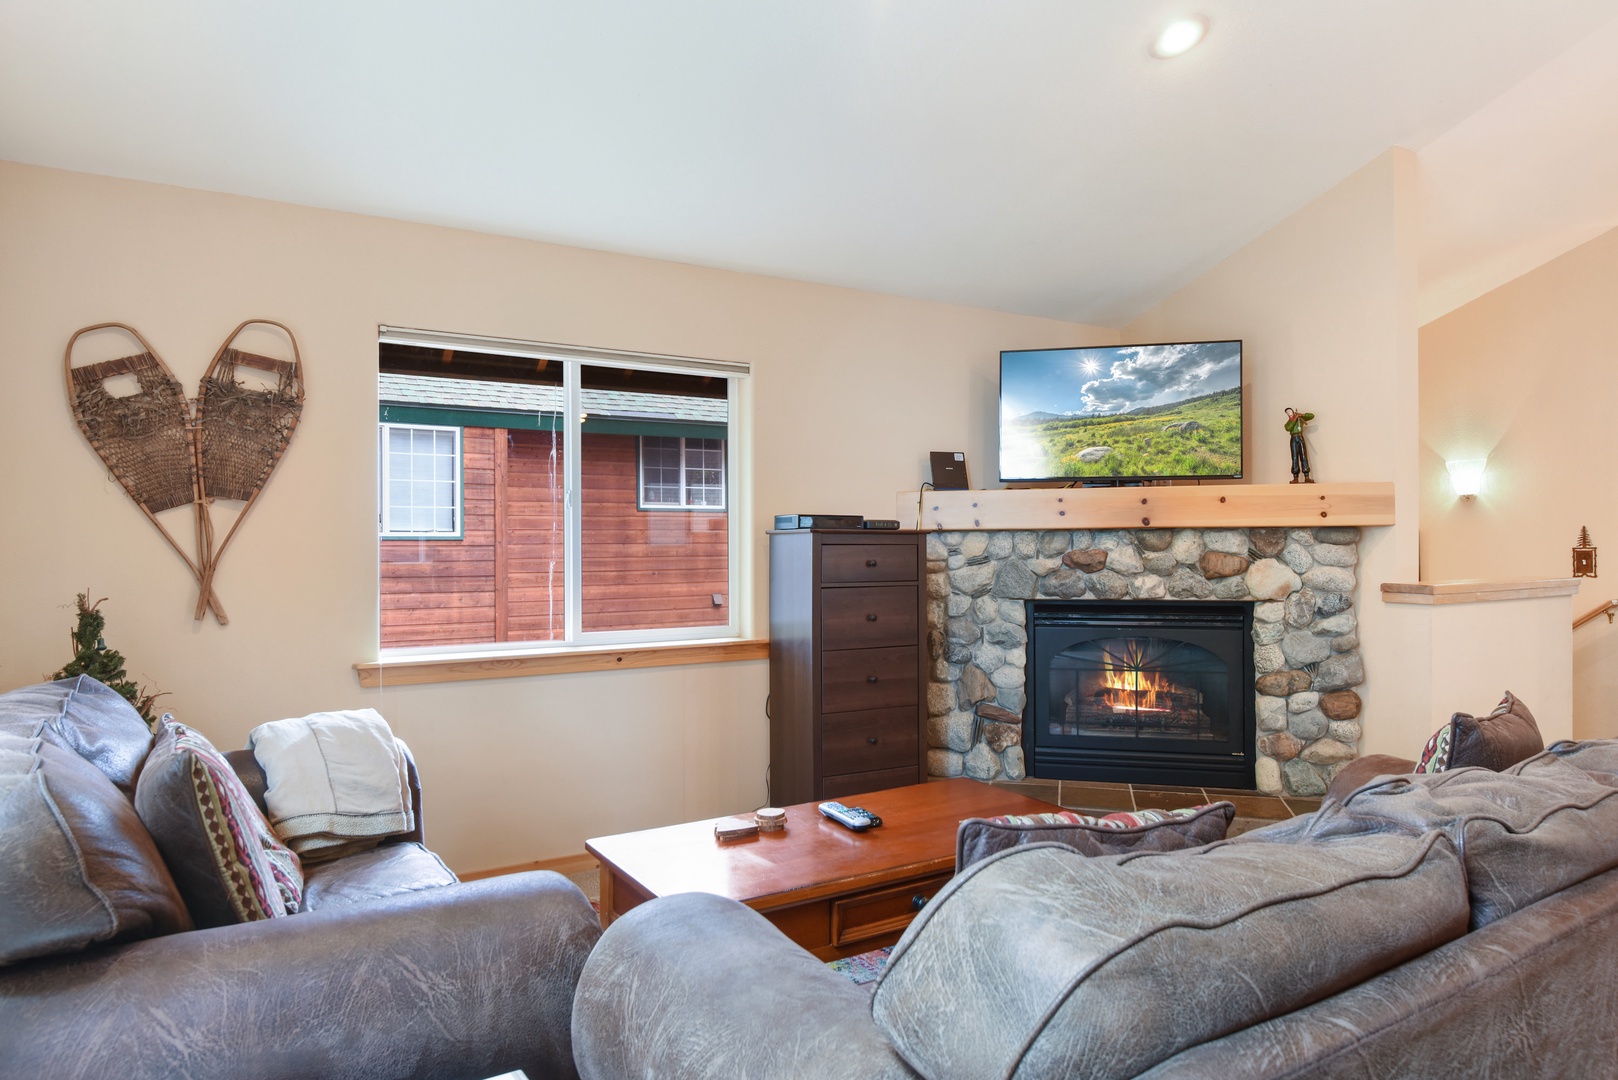 Living room with Smart/cable TV, gas fireplace and comfortable seating